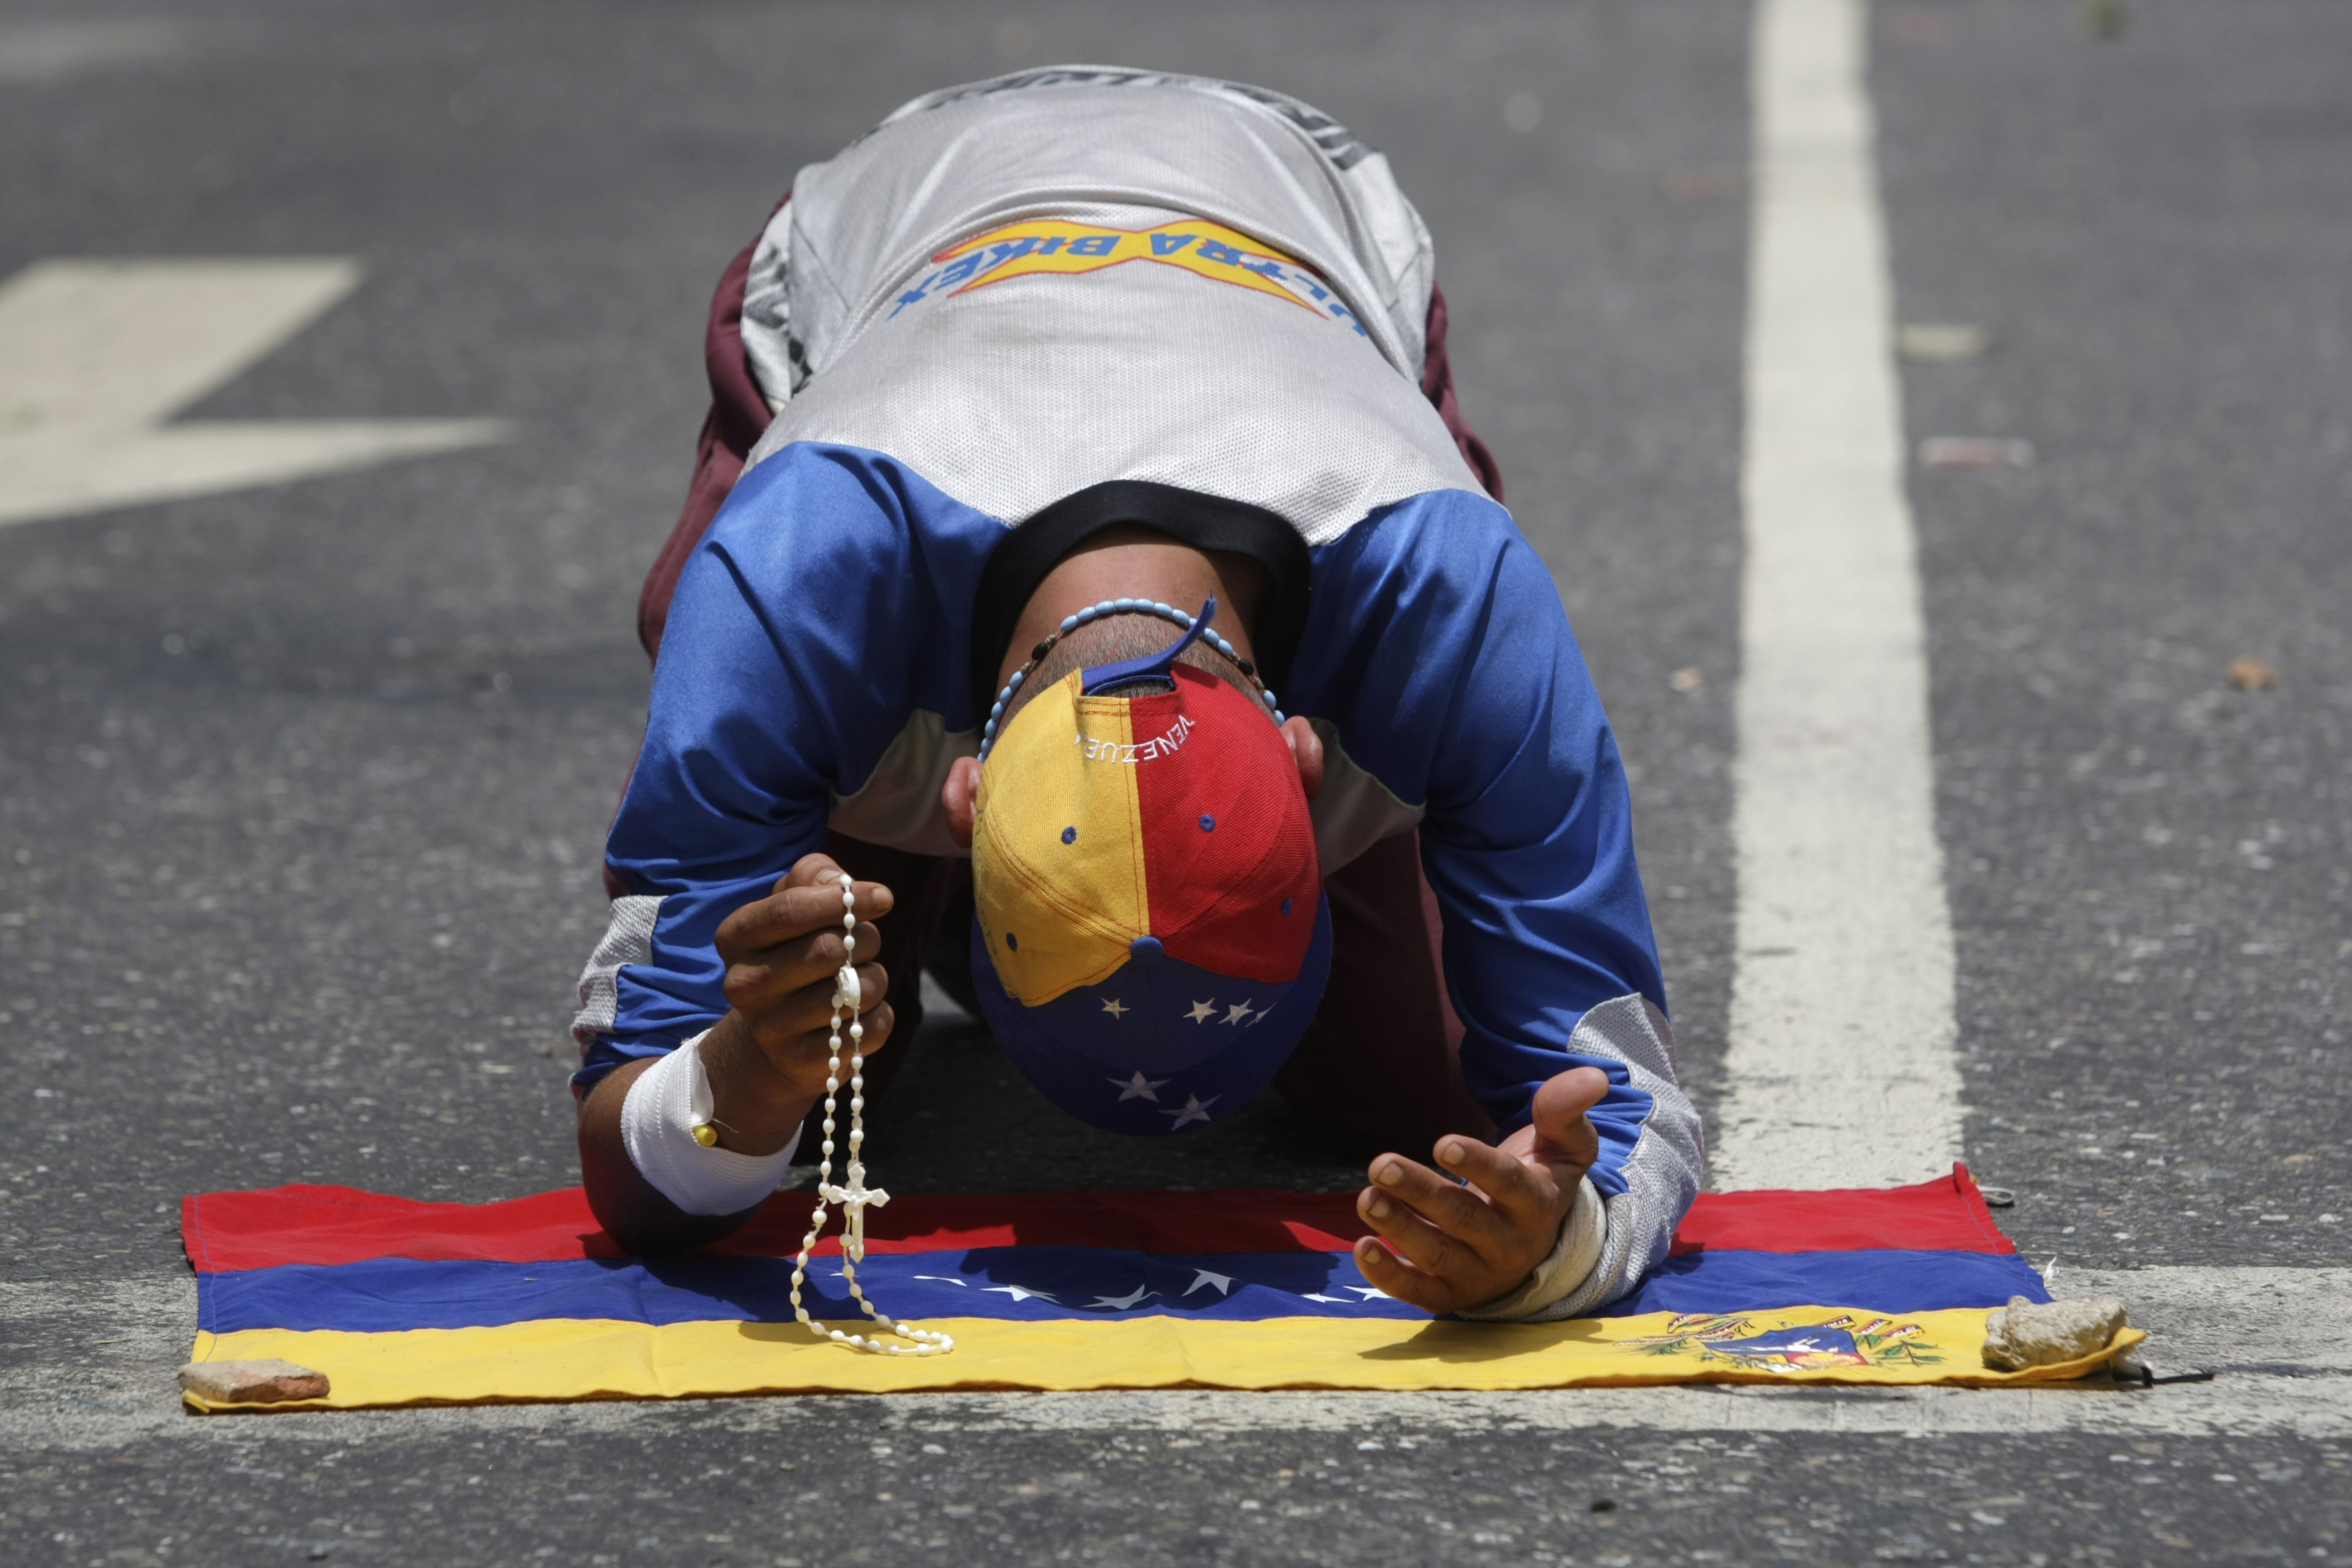 A demonstrator holding a rosary prays over a Venezuelan flag prior to a march against the government of President Nicolas Maduro in Caracas, Venezuela, Wednesday, May 31, 2017. Protests have left dozens dead in the last two months as the opposition demands immediate presidential elections and the liberation of political prisoners. (AP Photo/Fernando Llano)